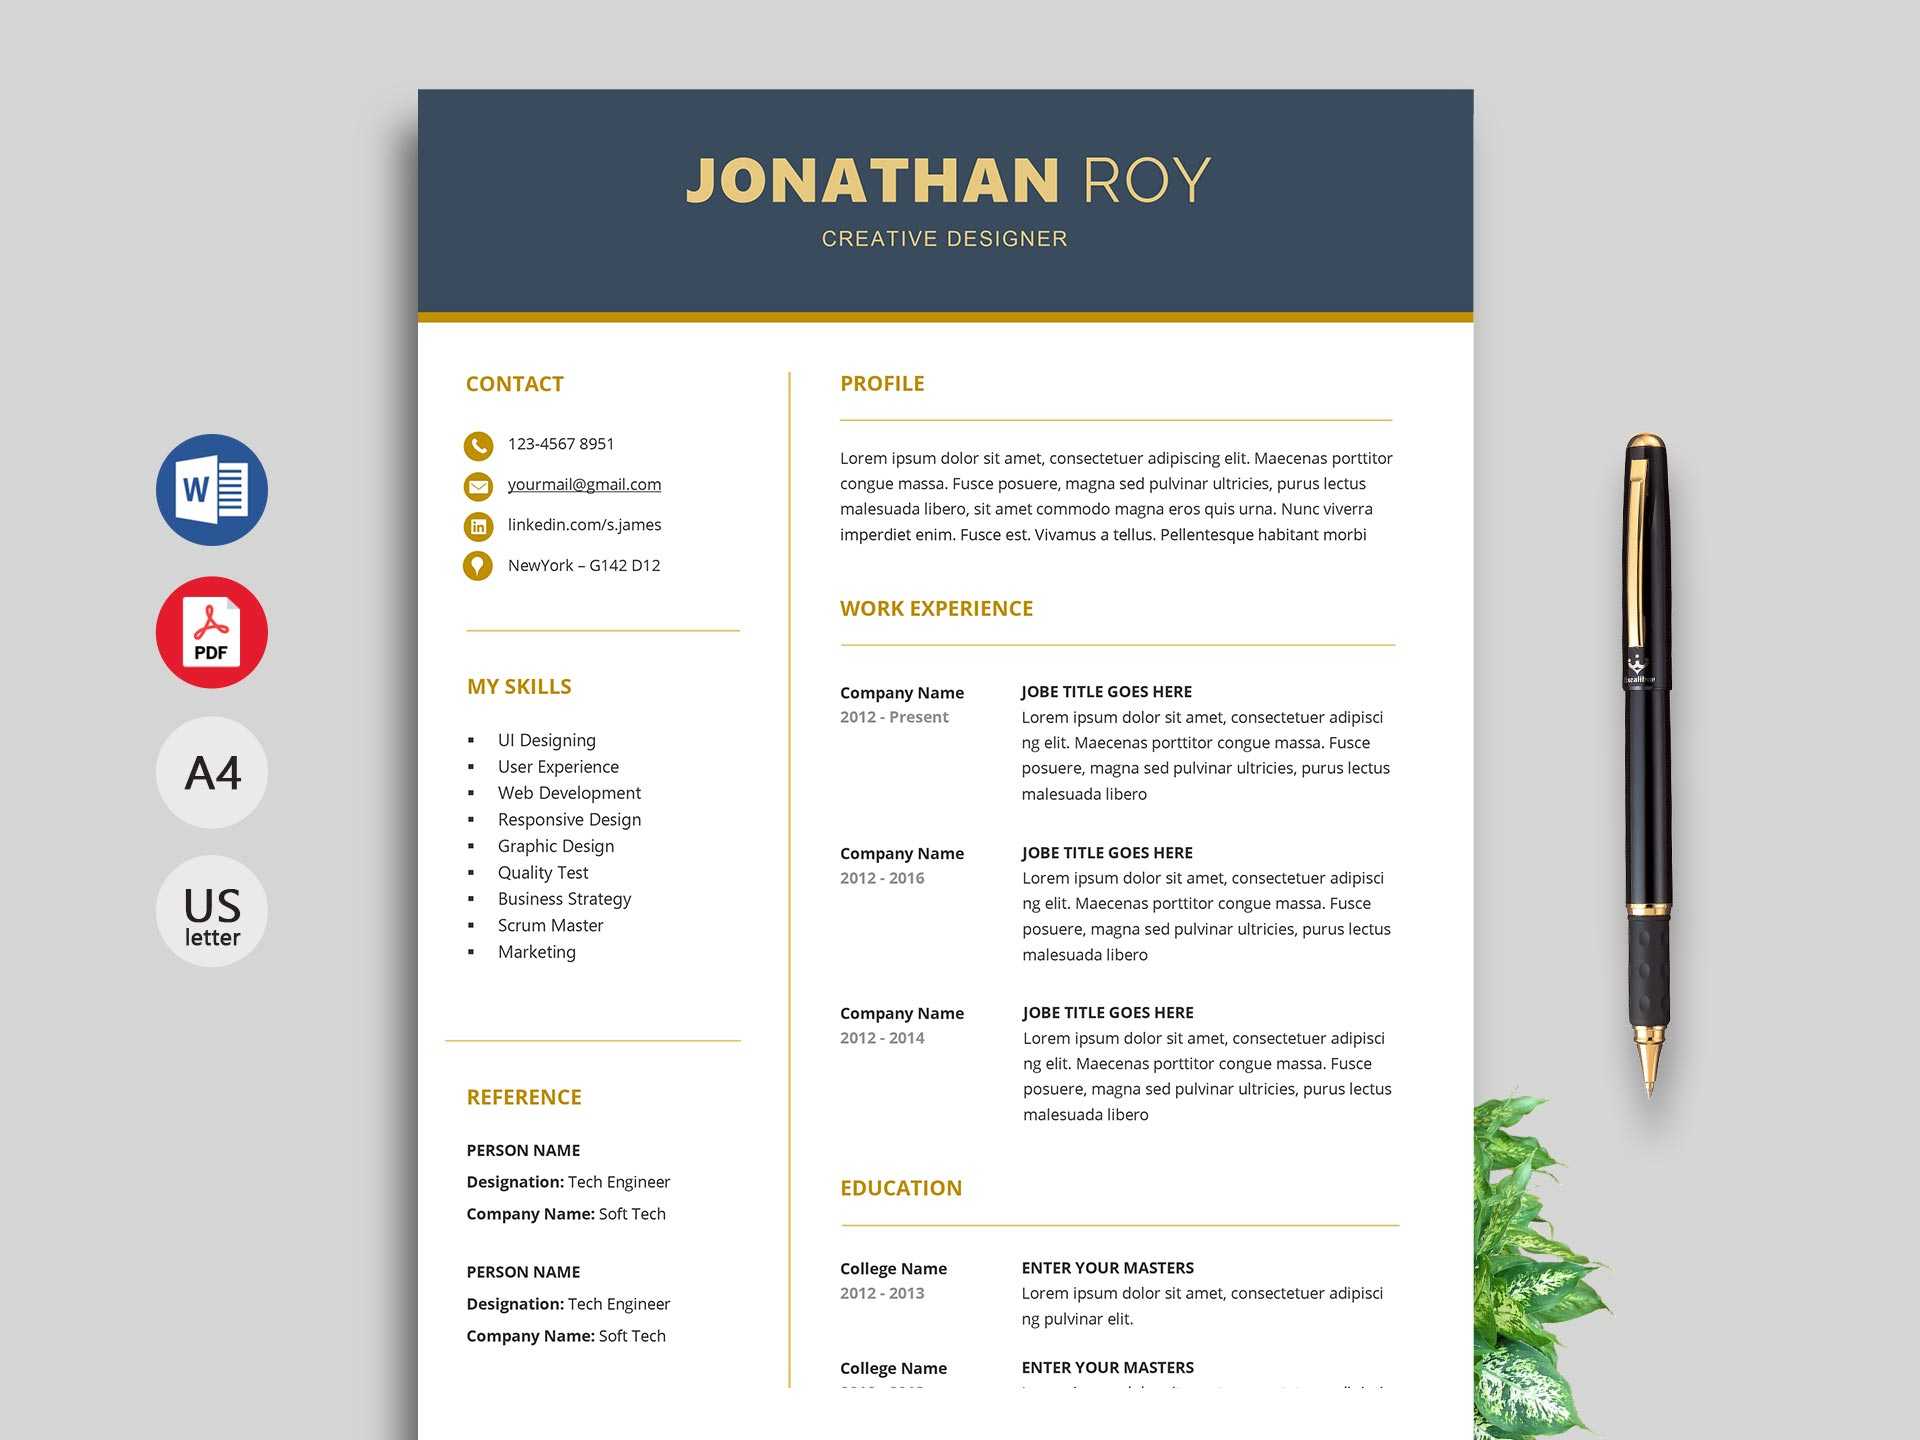 Free Simple Resume & Cv Templates Word Format 2020 | Resumekraft With Regard To Free Downloadable Resume Templates For Word